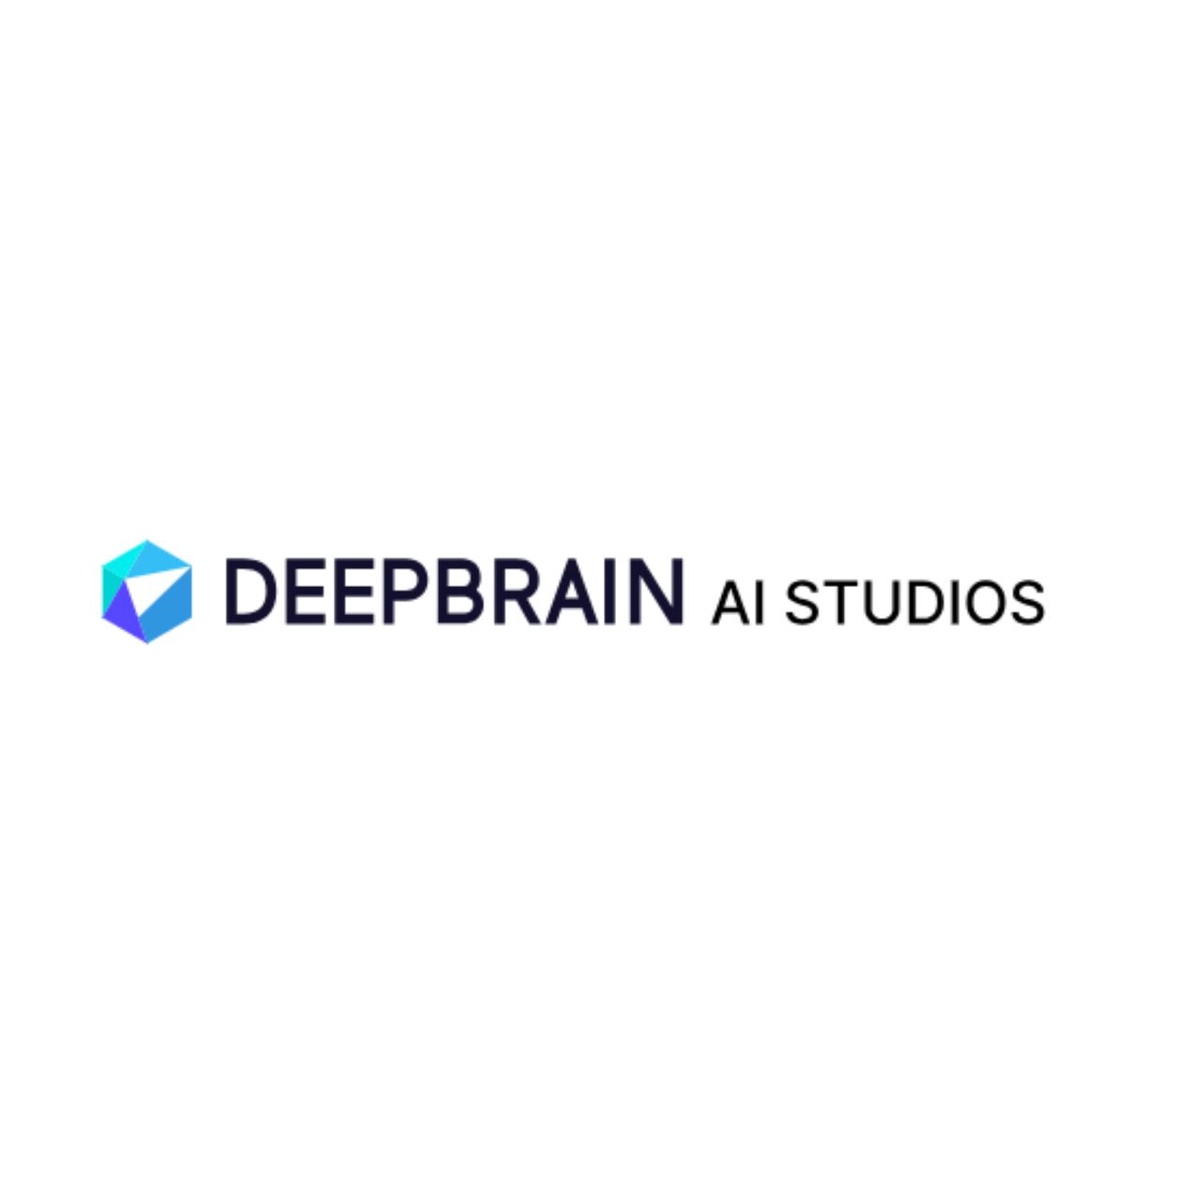 Captivate Audiences with Deepbrain.io's Text to Video Conversion